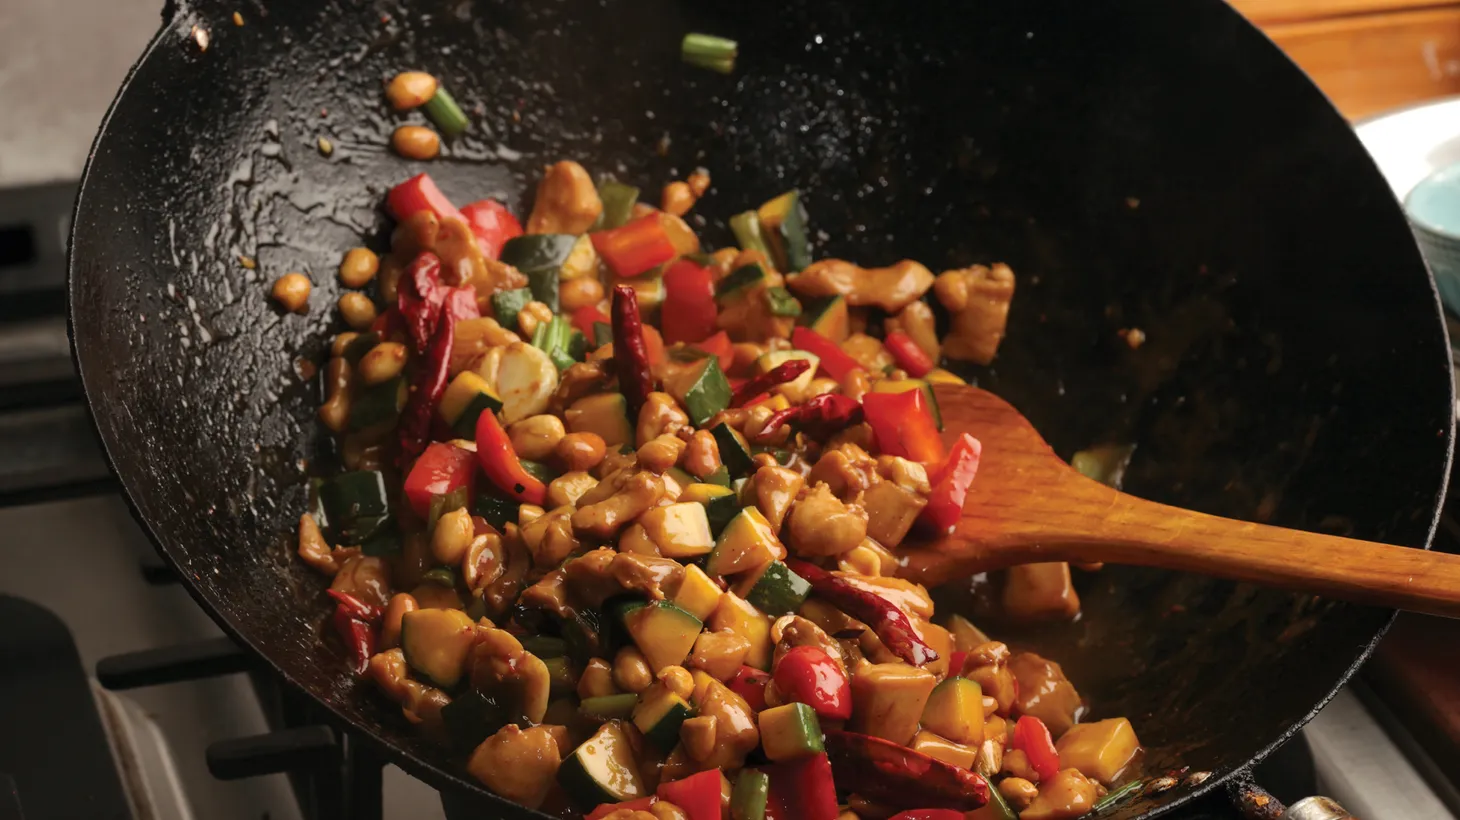 Chef and food columnist J. Kenji López-Alt calls the wok the most versatile tool in the kitchen and cooks traditional stir frys and stocks in the one he’s owned since college.